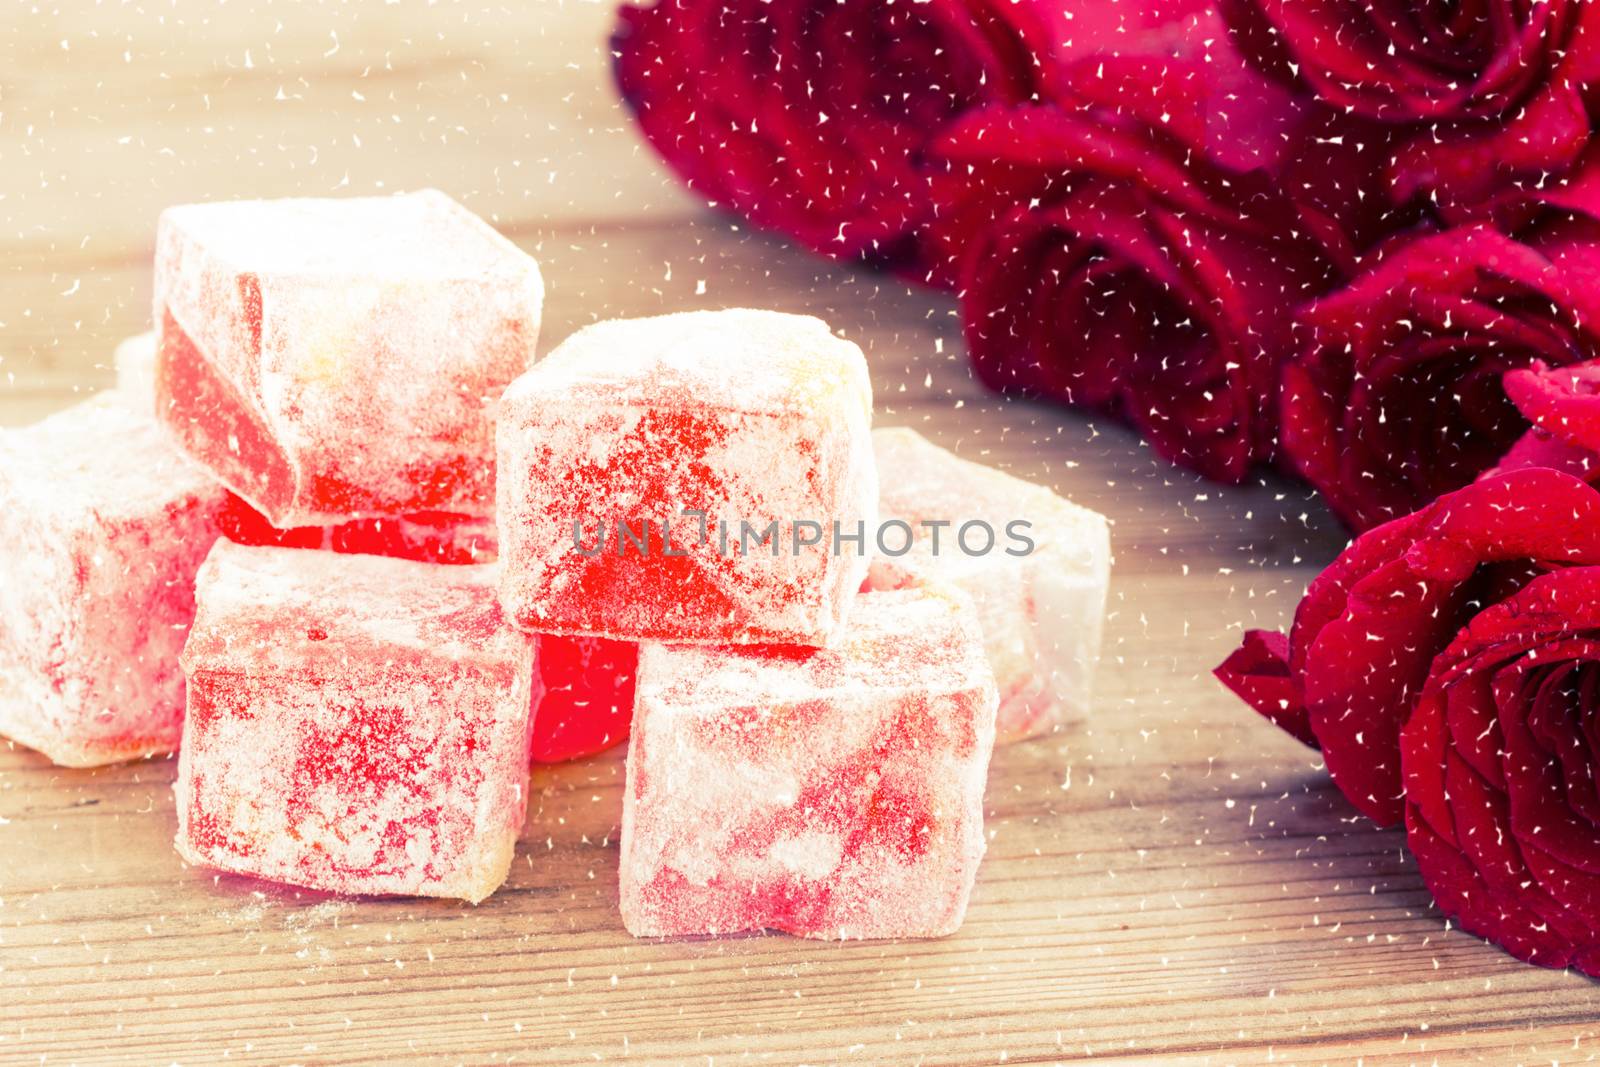 Delicious Turkish Delight of Roses by liwei12